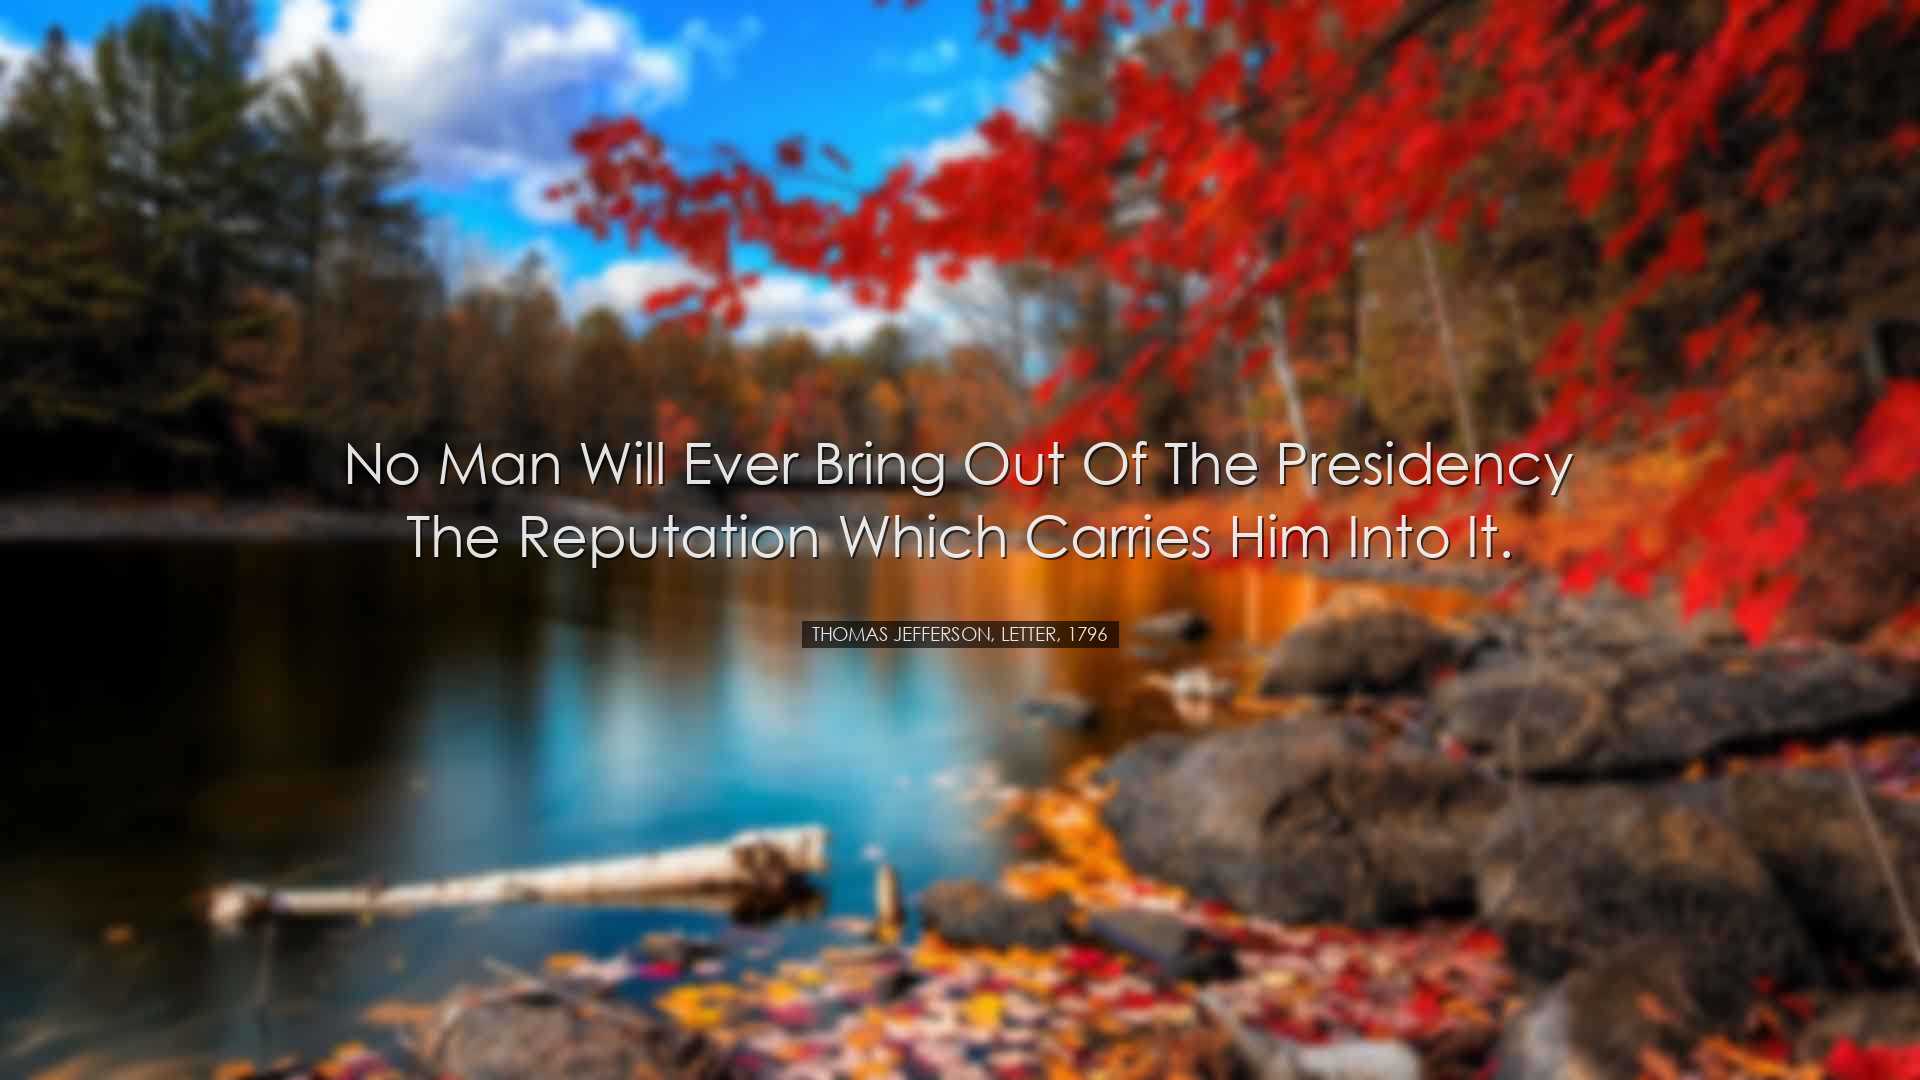 No man will ever bring out of the Presidency the reputation which